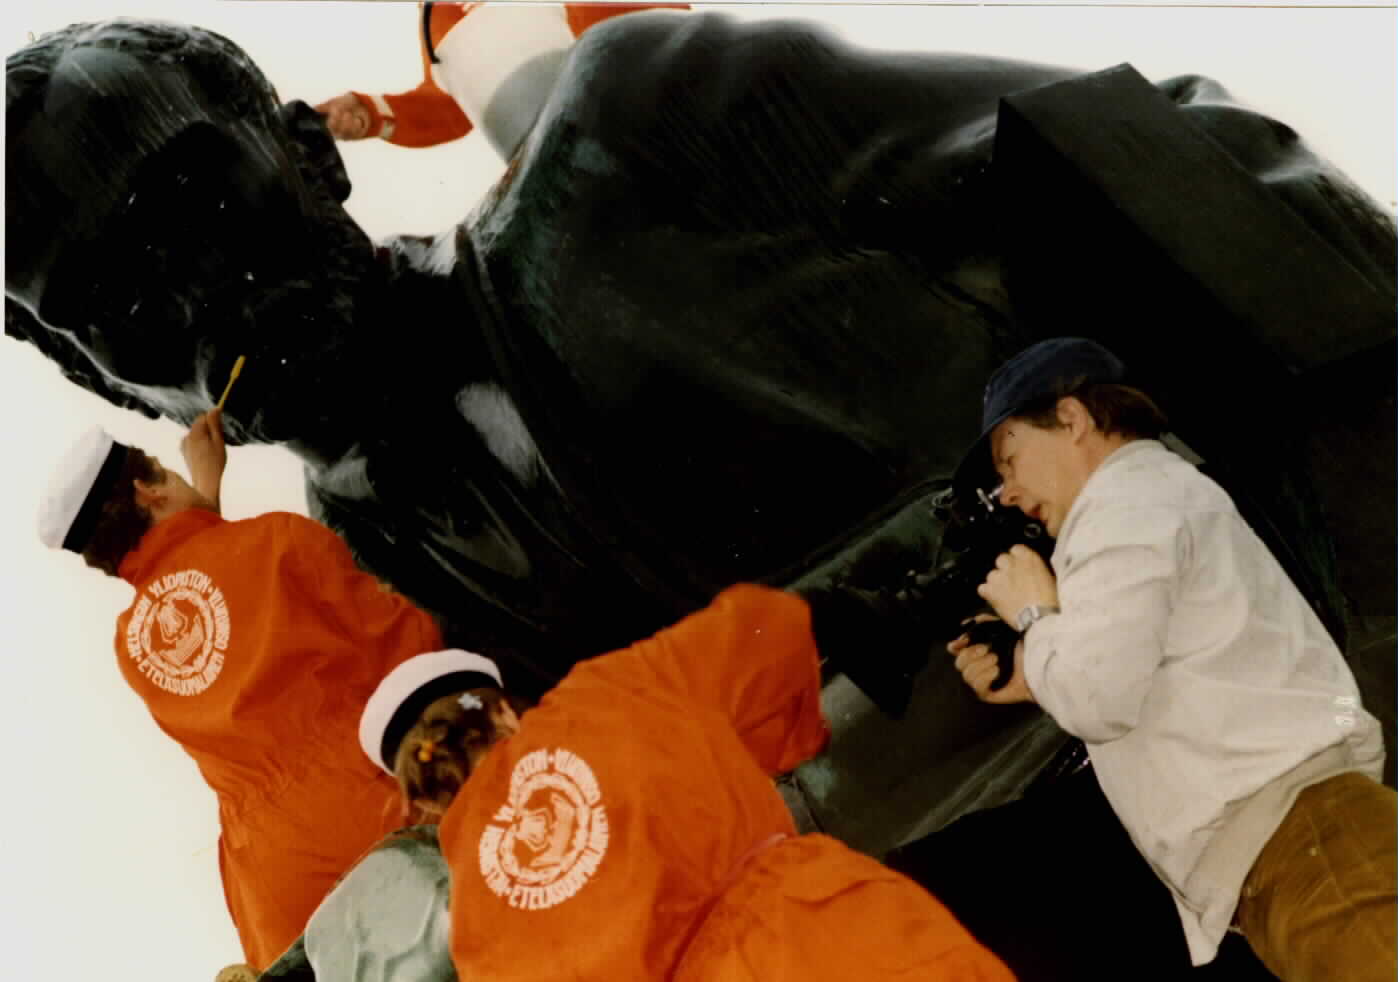 Two students, with their backs to the photographer, wearing orange overalls and student caps while washing the statue of writer Aleksis Kivi with toothbrushes. Another student on the right is recording the event.